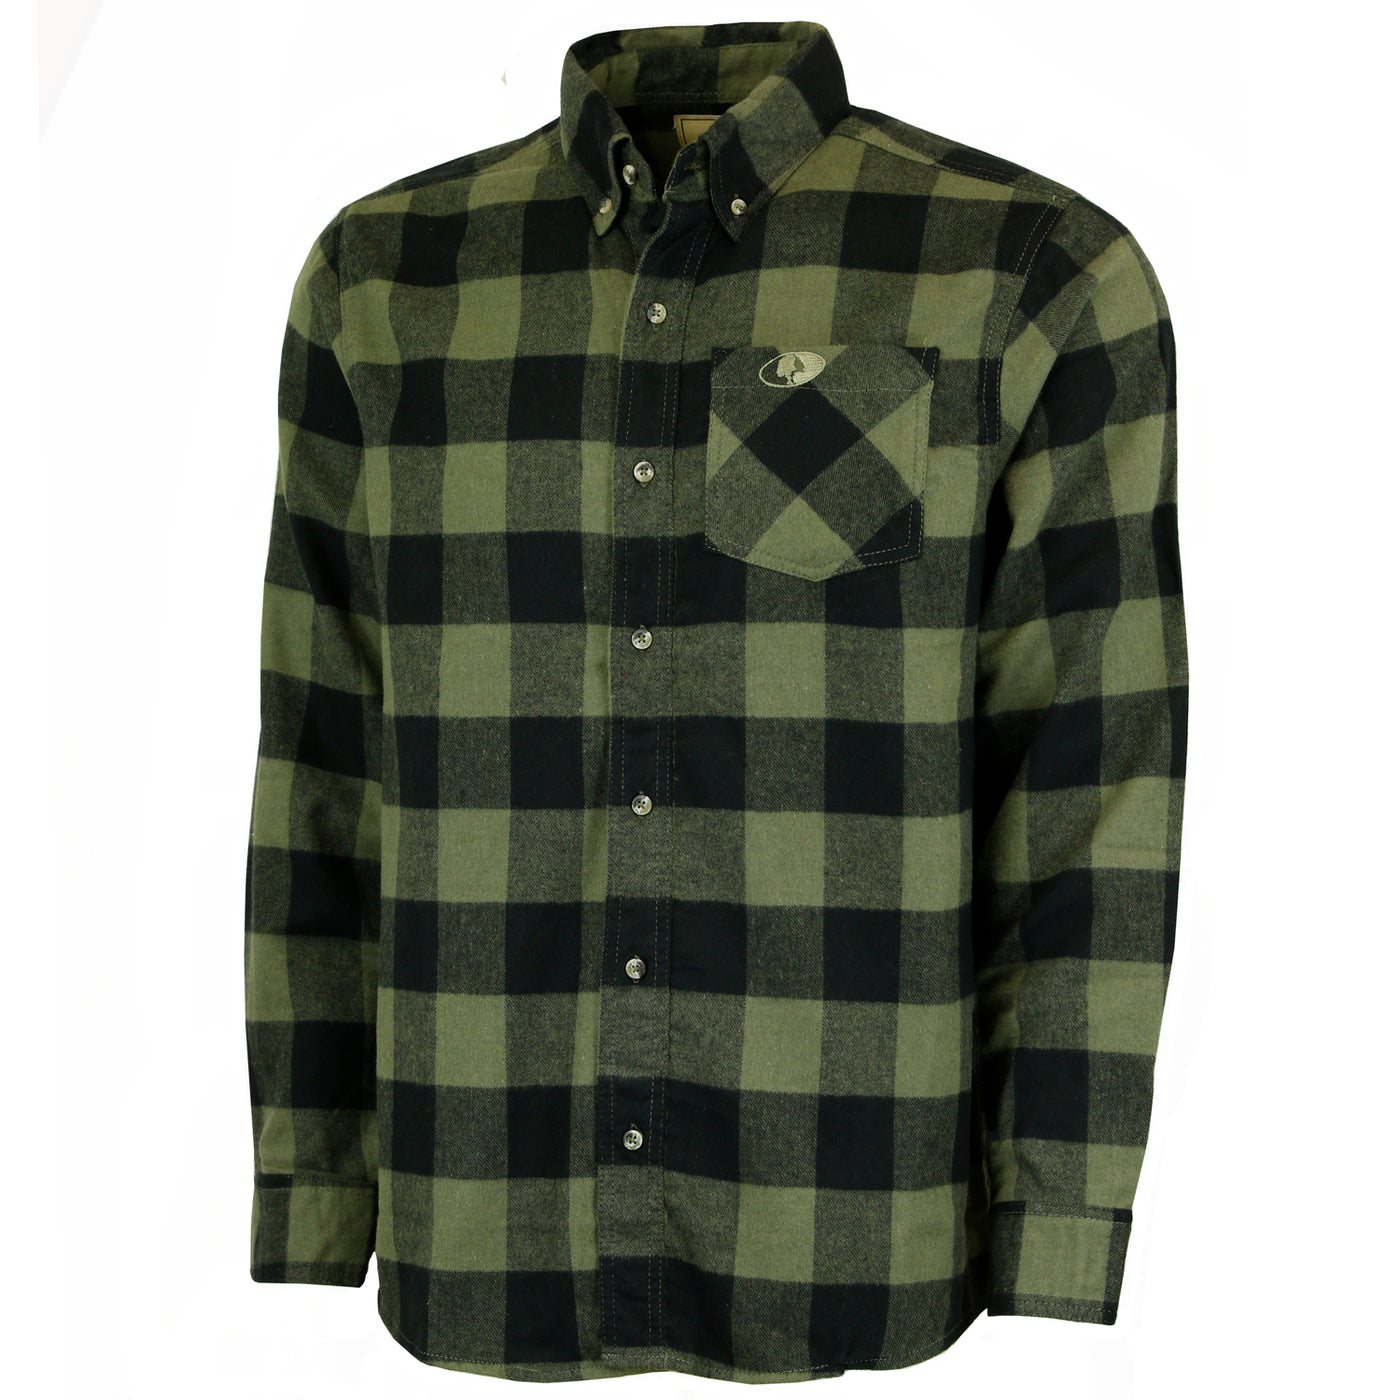 Mossy Oak Men's Thermal Lined Plaid Flannel Shirt – The Mossy Oak Store